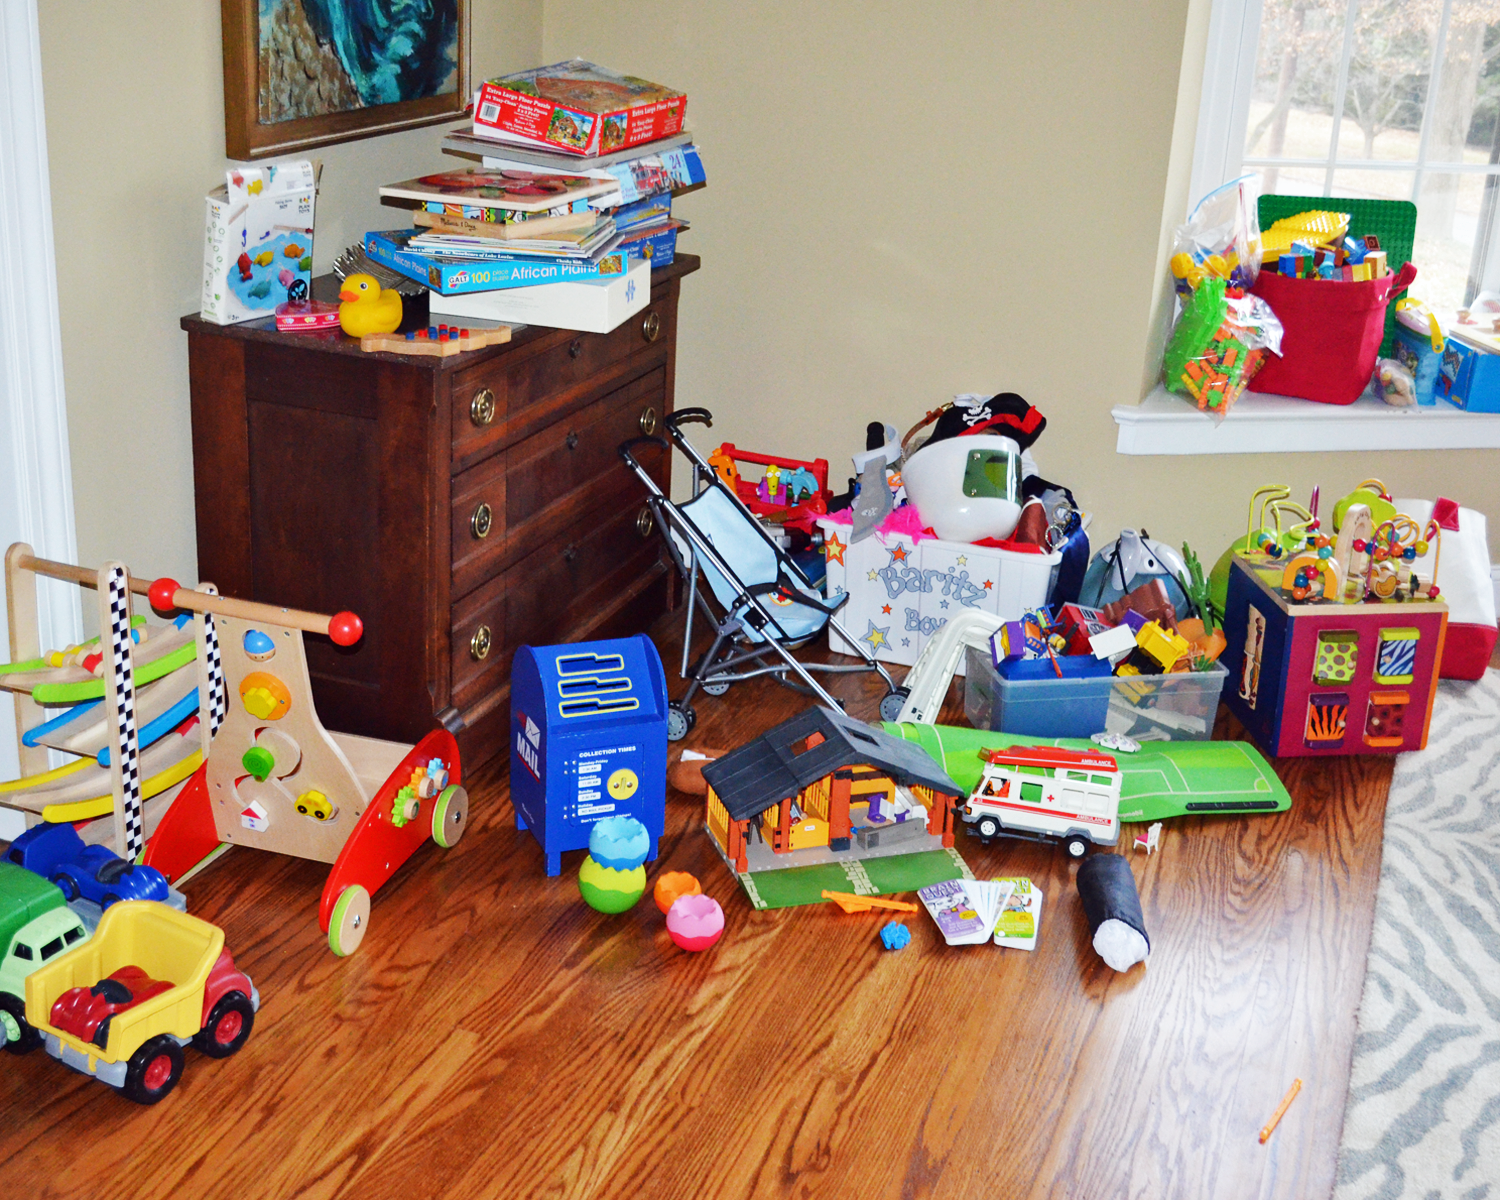 More toys to donate after the life-change magic of tidying up!